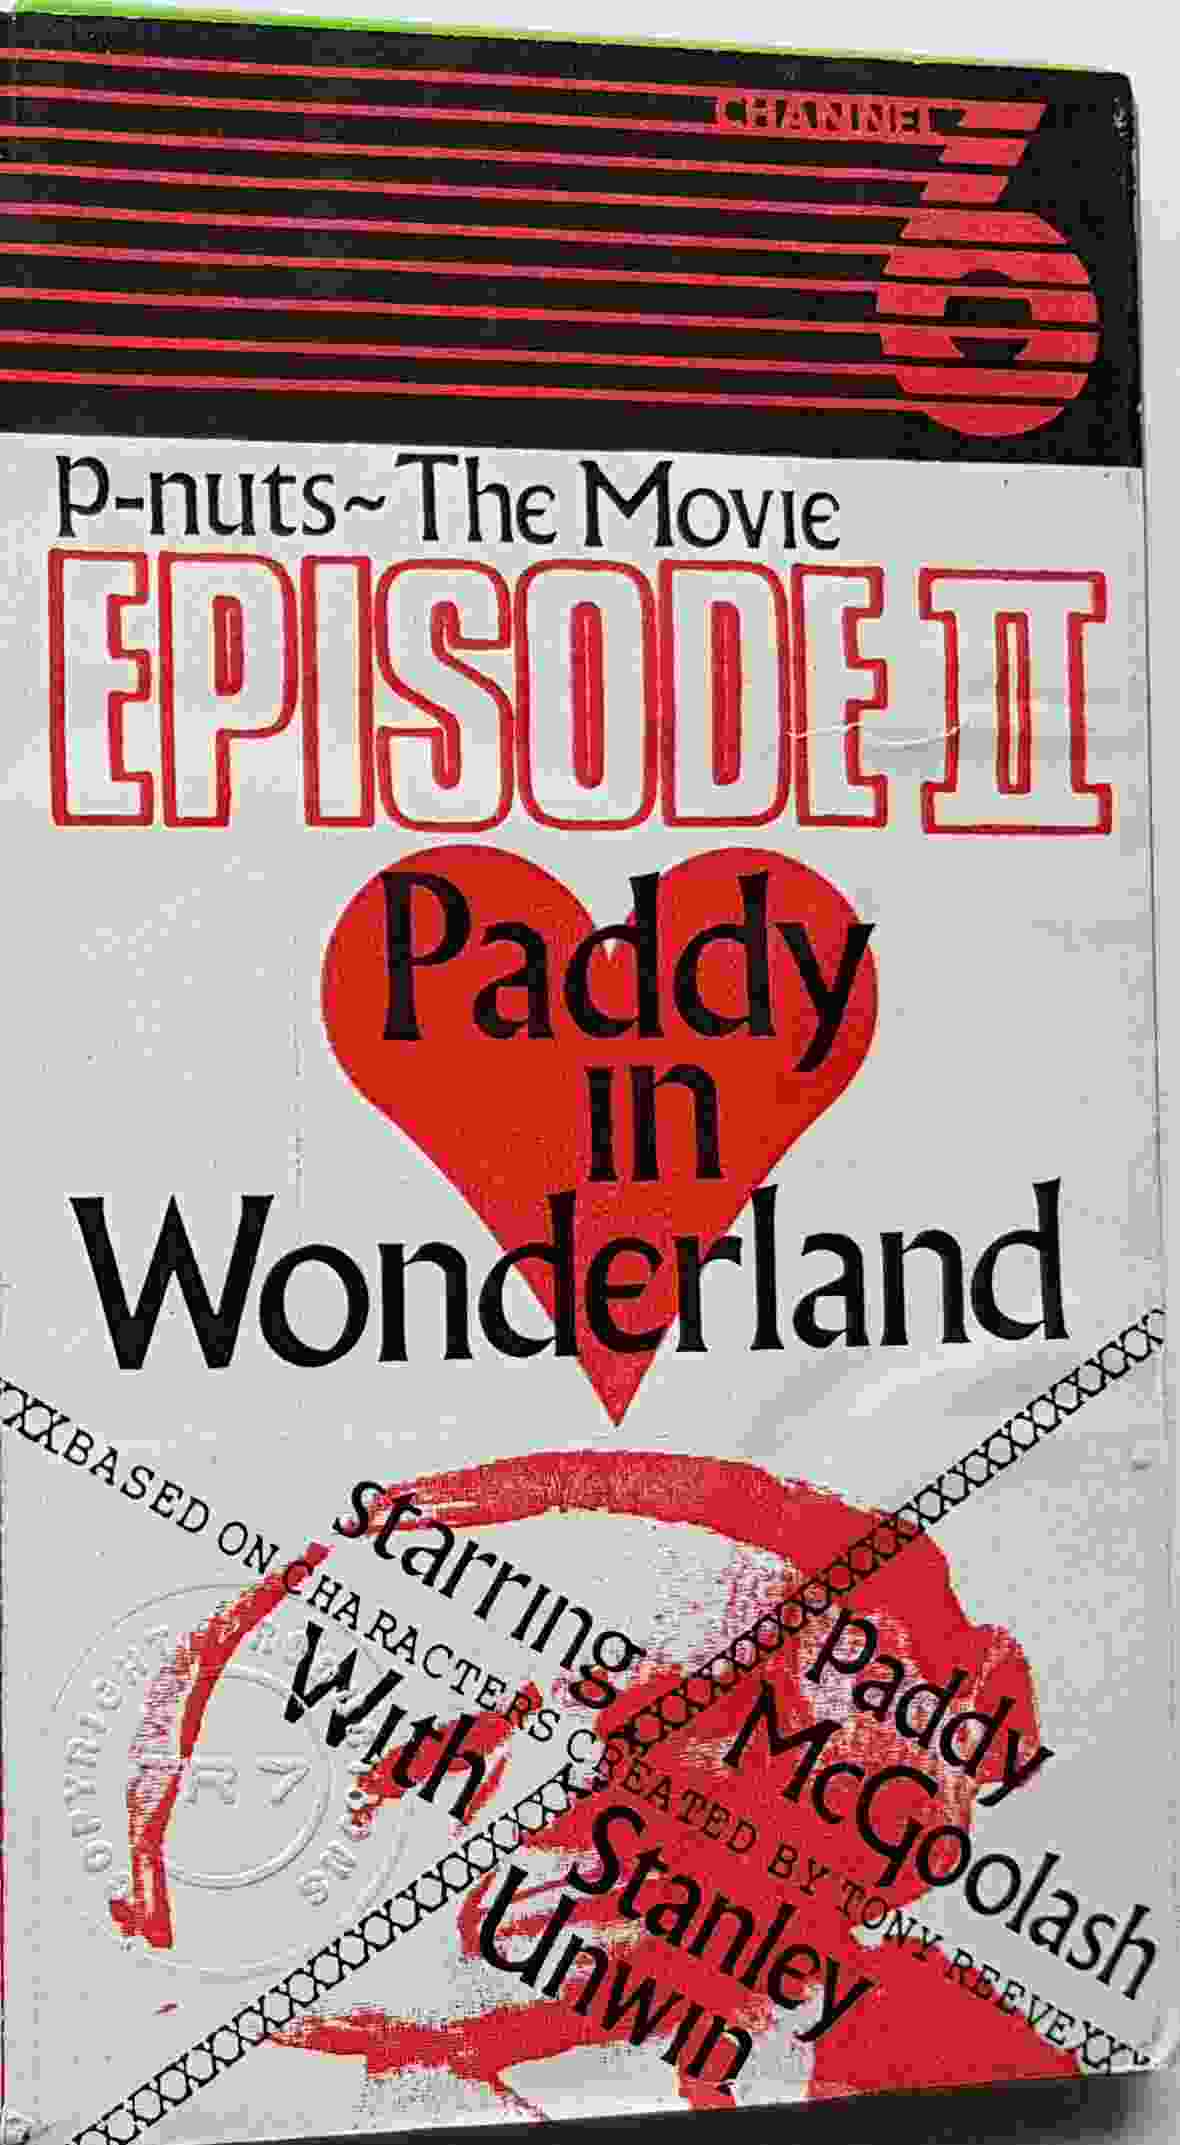 Picture of videos-PM-PIW Paddy McGoolash - Paddy in Wonderland by artist Unknown 